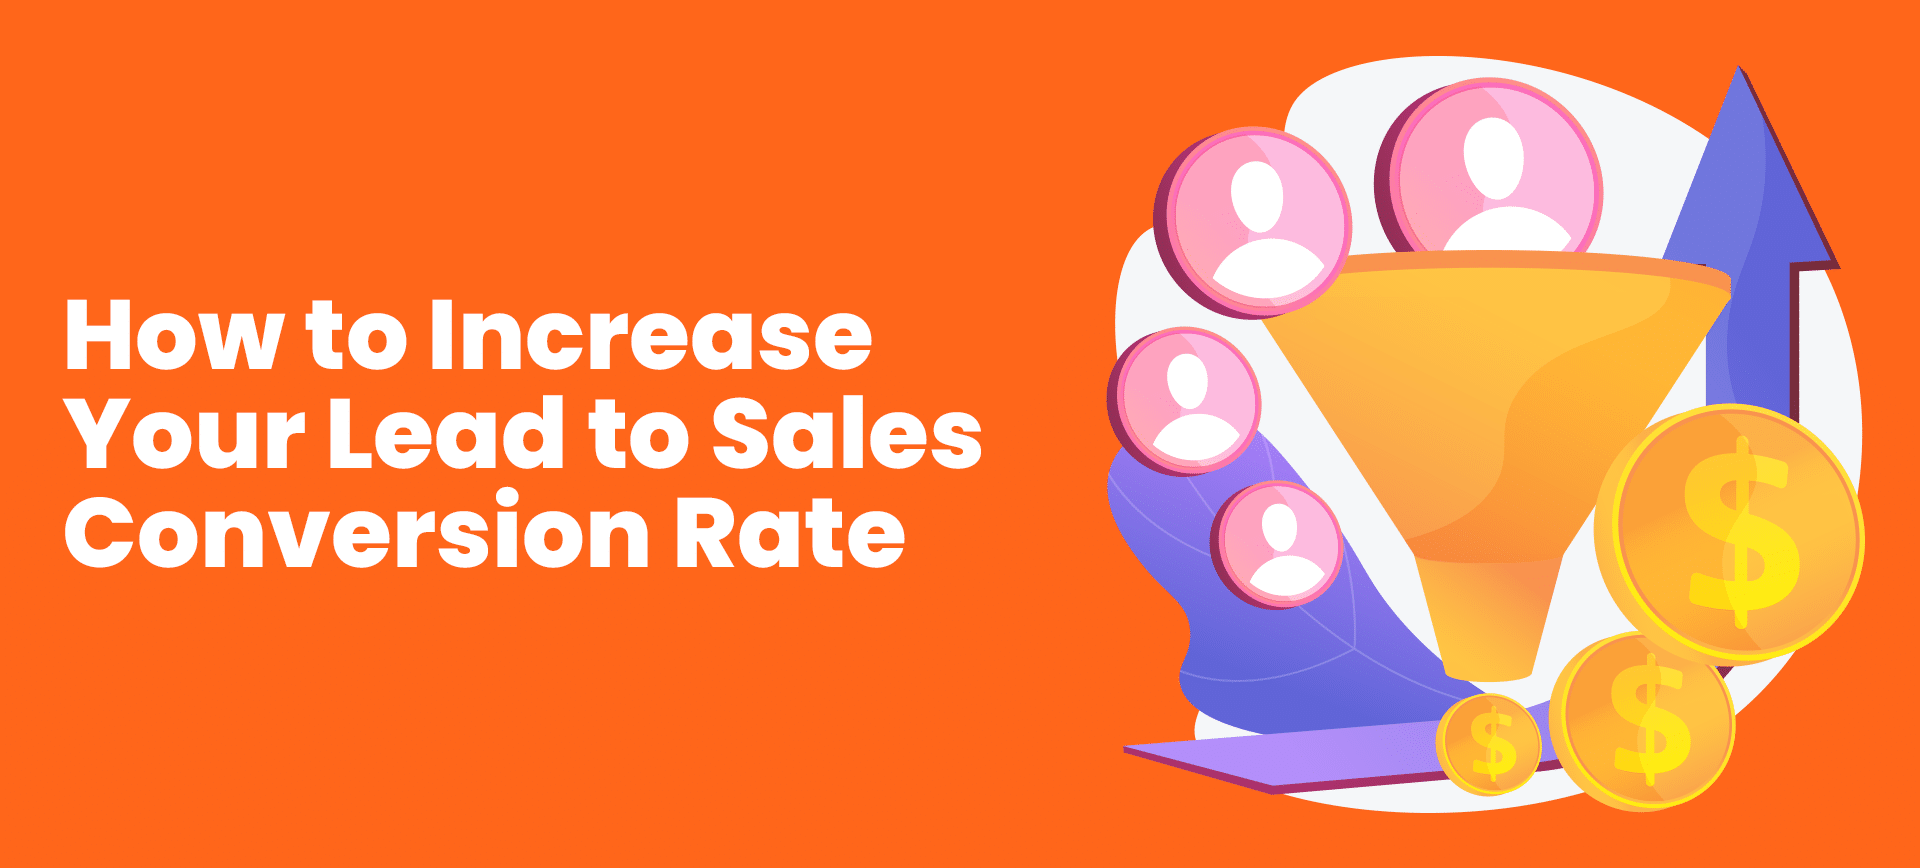 How to Increase Your Lead to Sales Conversion Rate